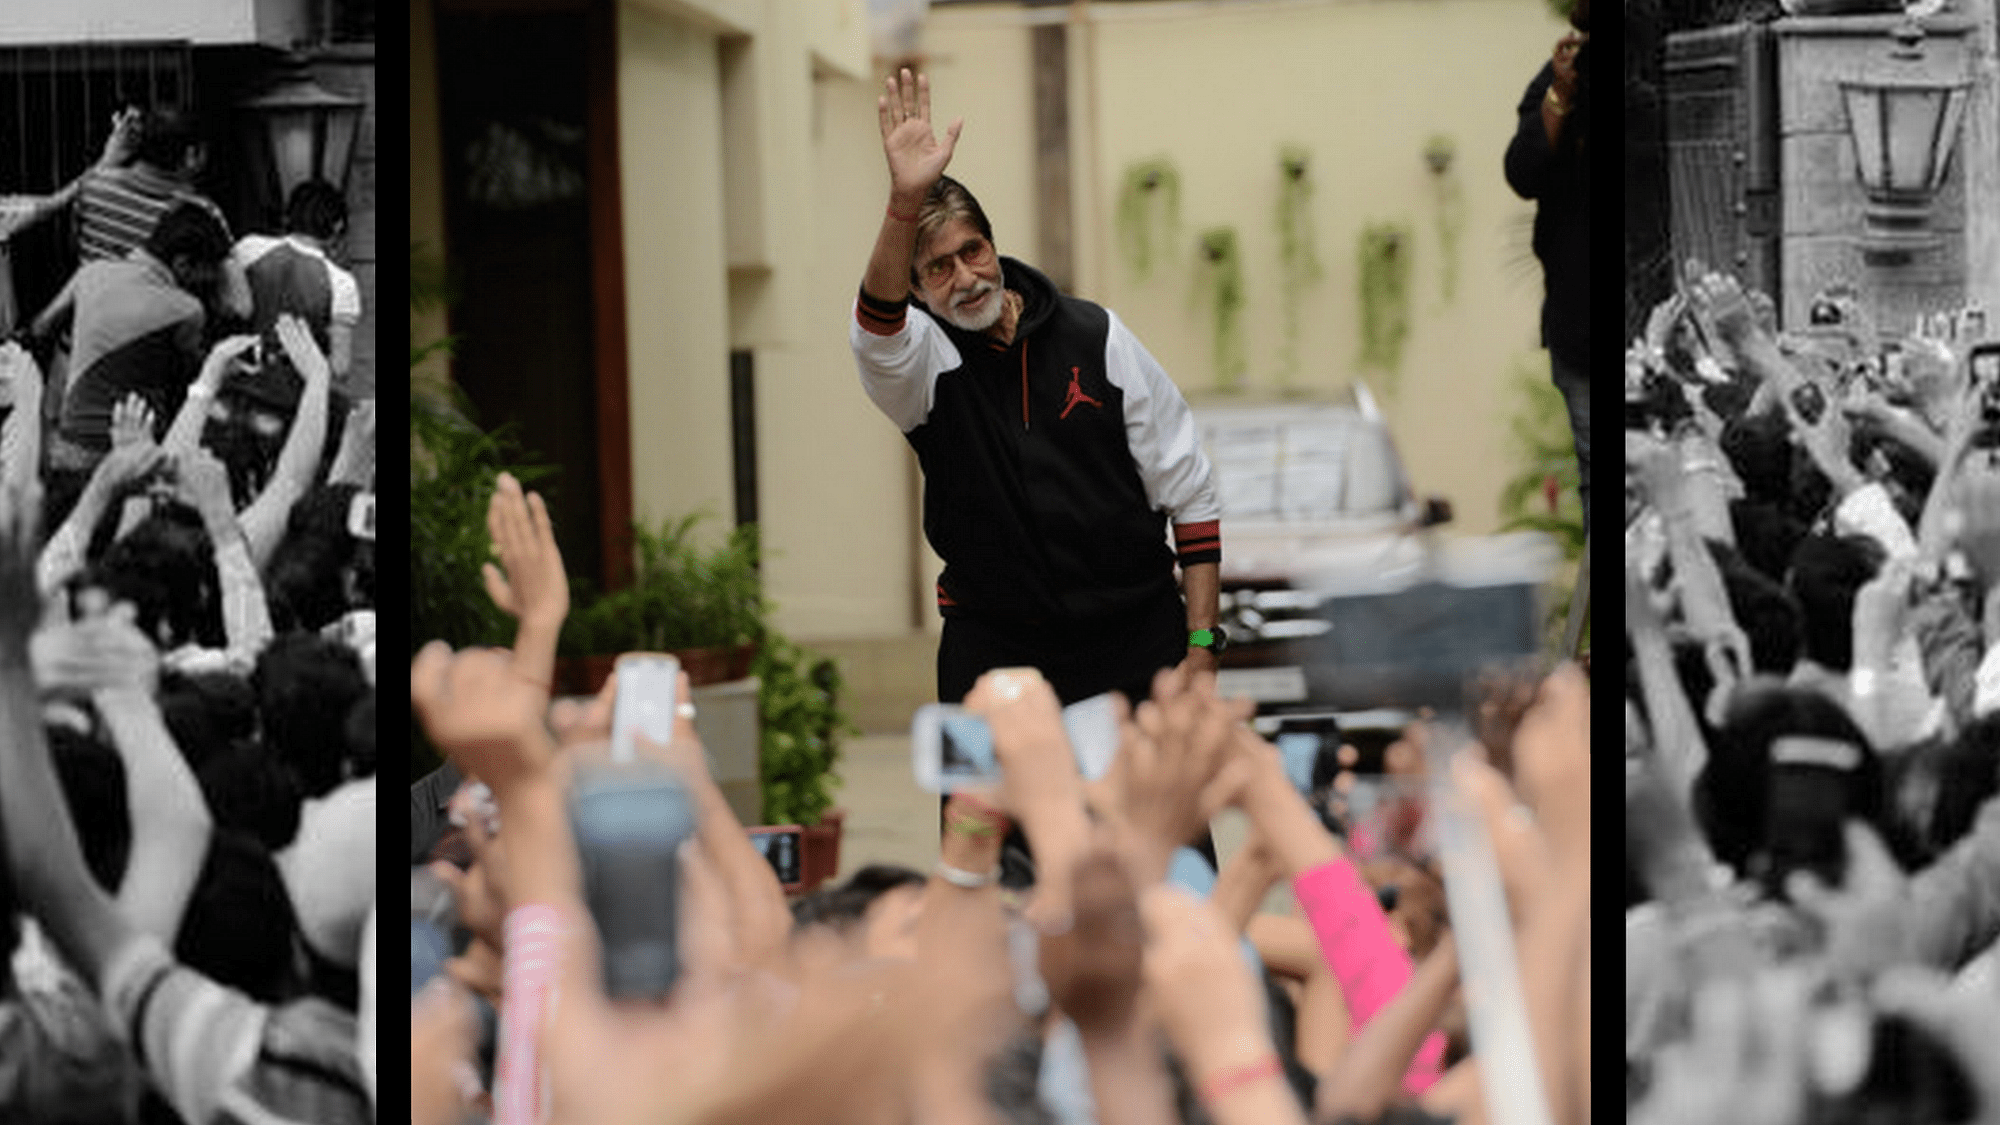 Amitabh Bachchan waves to the crowd gathered outside his house every Sunday&nbsp;(Photo: Blog/srbachchan.tumblr.com)